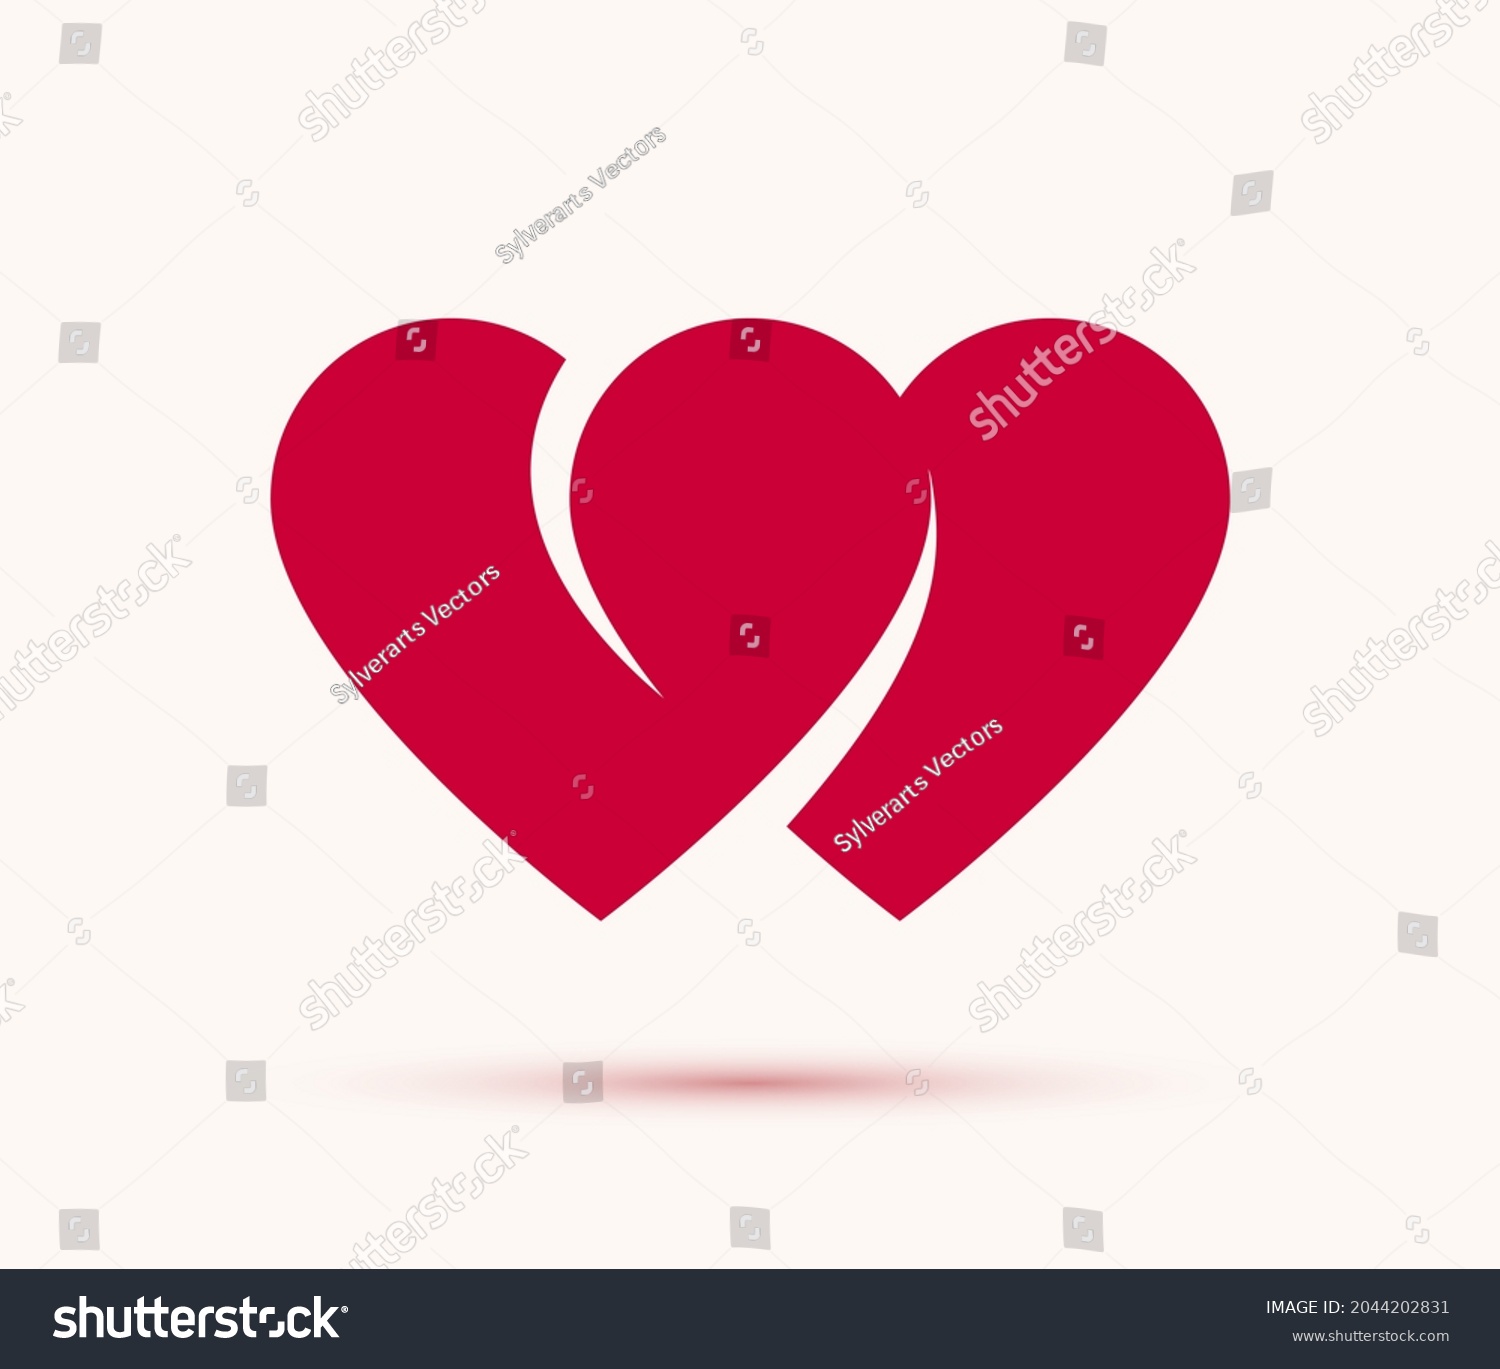 SVG of Double two hearts vector icon or logo, wedding and couple concept romantic theme, care and togetherness, two linked hearts connected. svg